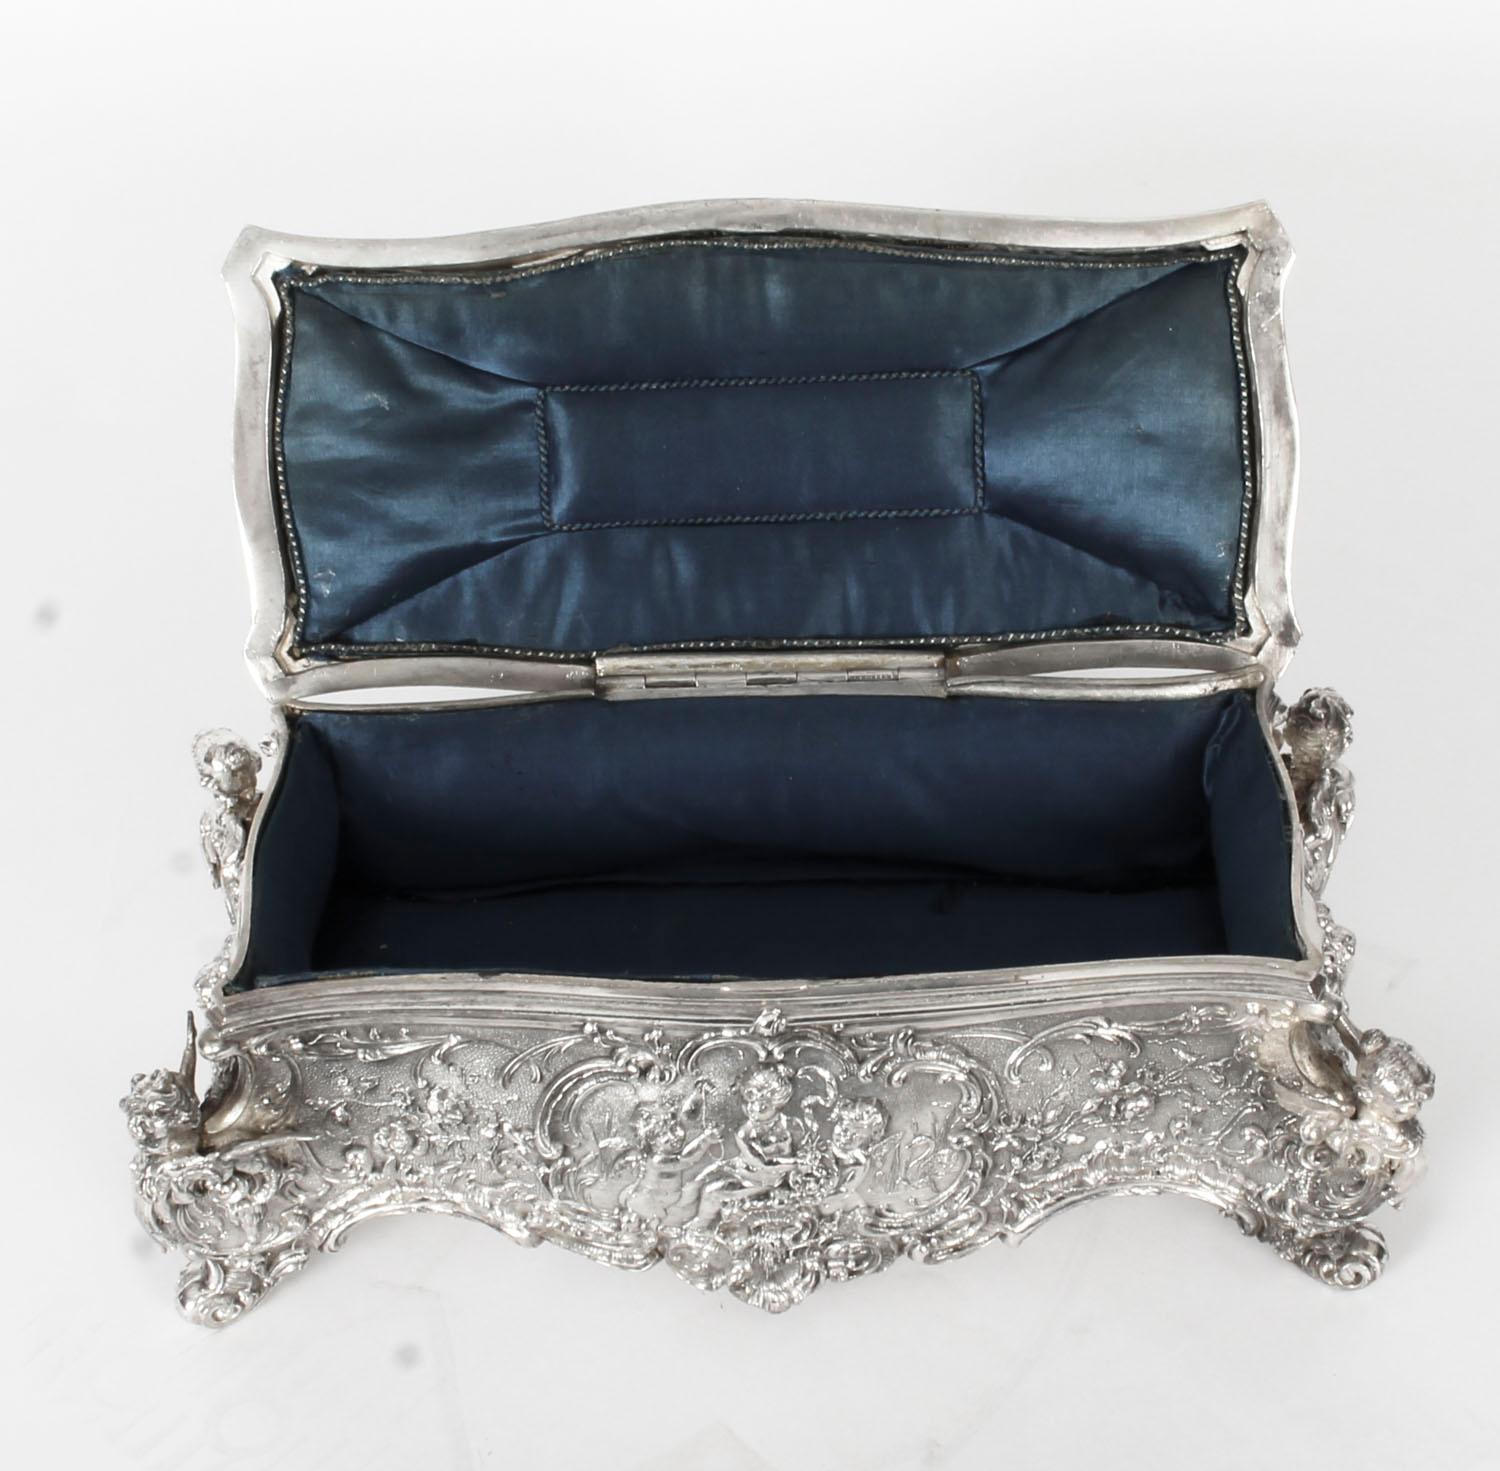 Late 19th Century 19th Century German WMF Silver Plated Casket / Jewelry Box